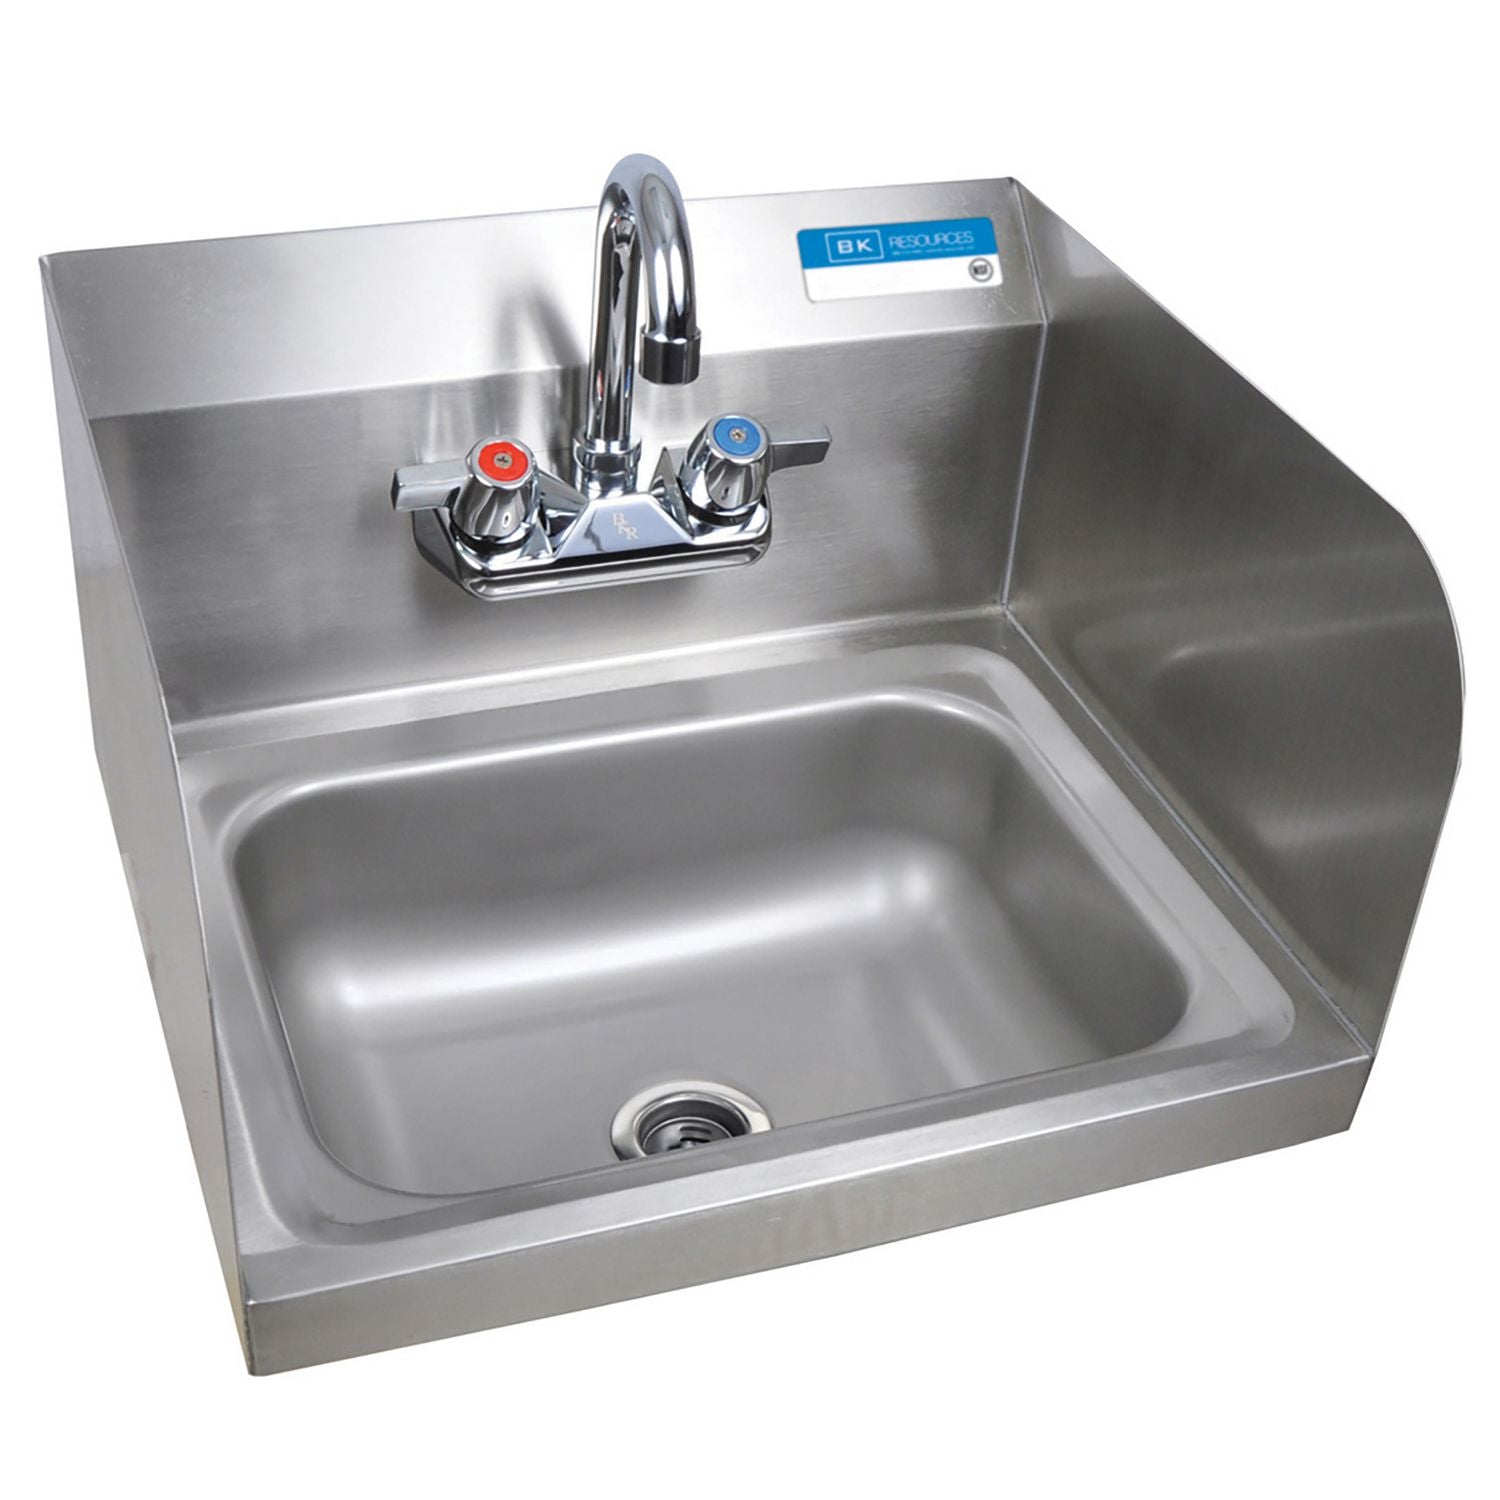 stainless-steel-hand-sink-with-side-splashes-and-faucet-14-l-x-10-w-x-5-h-ships-in-4-6-business-days_bkehsw1410ssp - 1